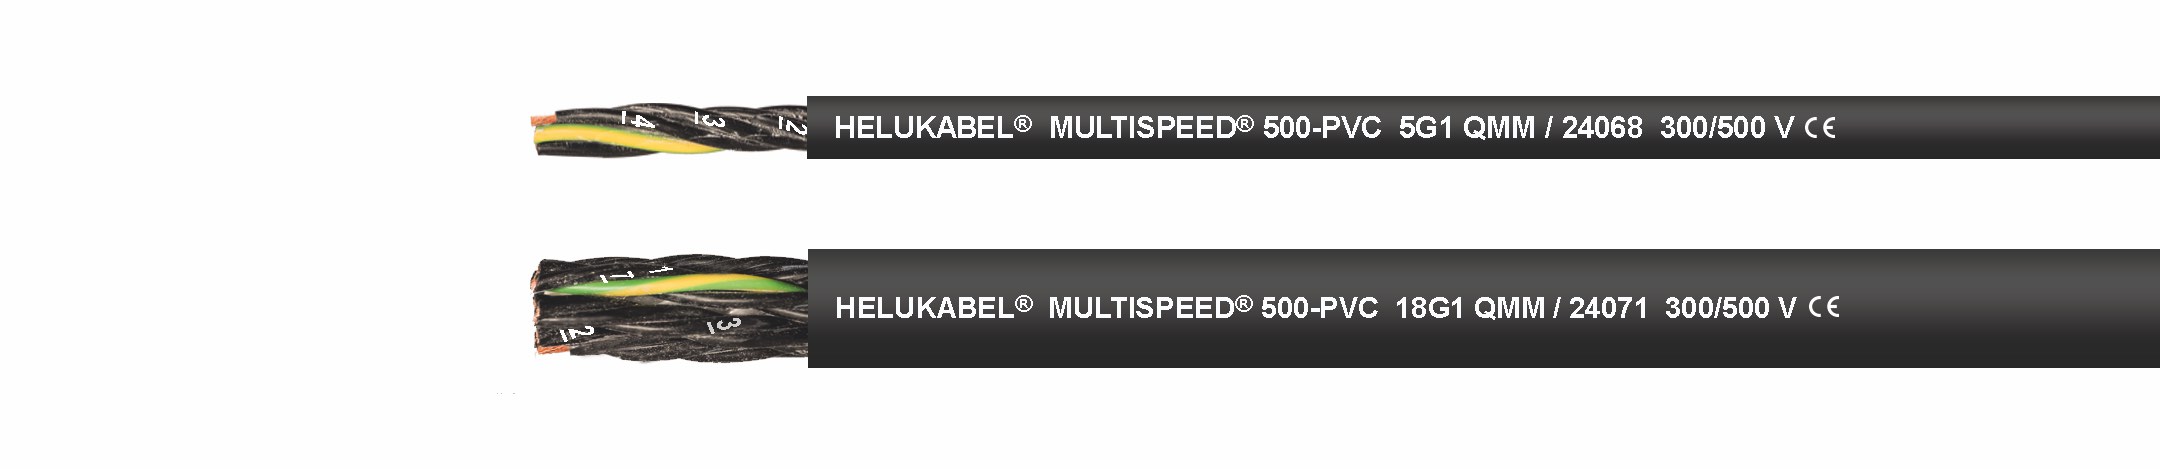 Cable Helukabel: MULTISPEED 500-PVC (PVC)